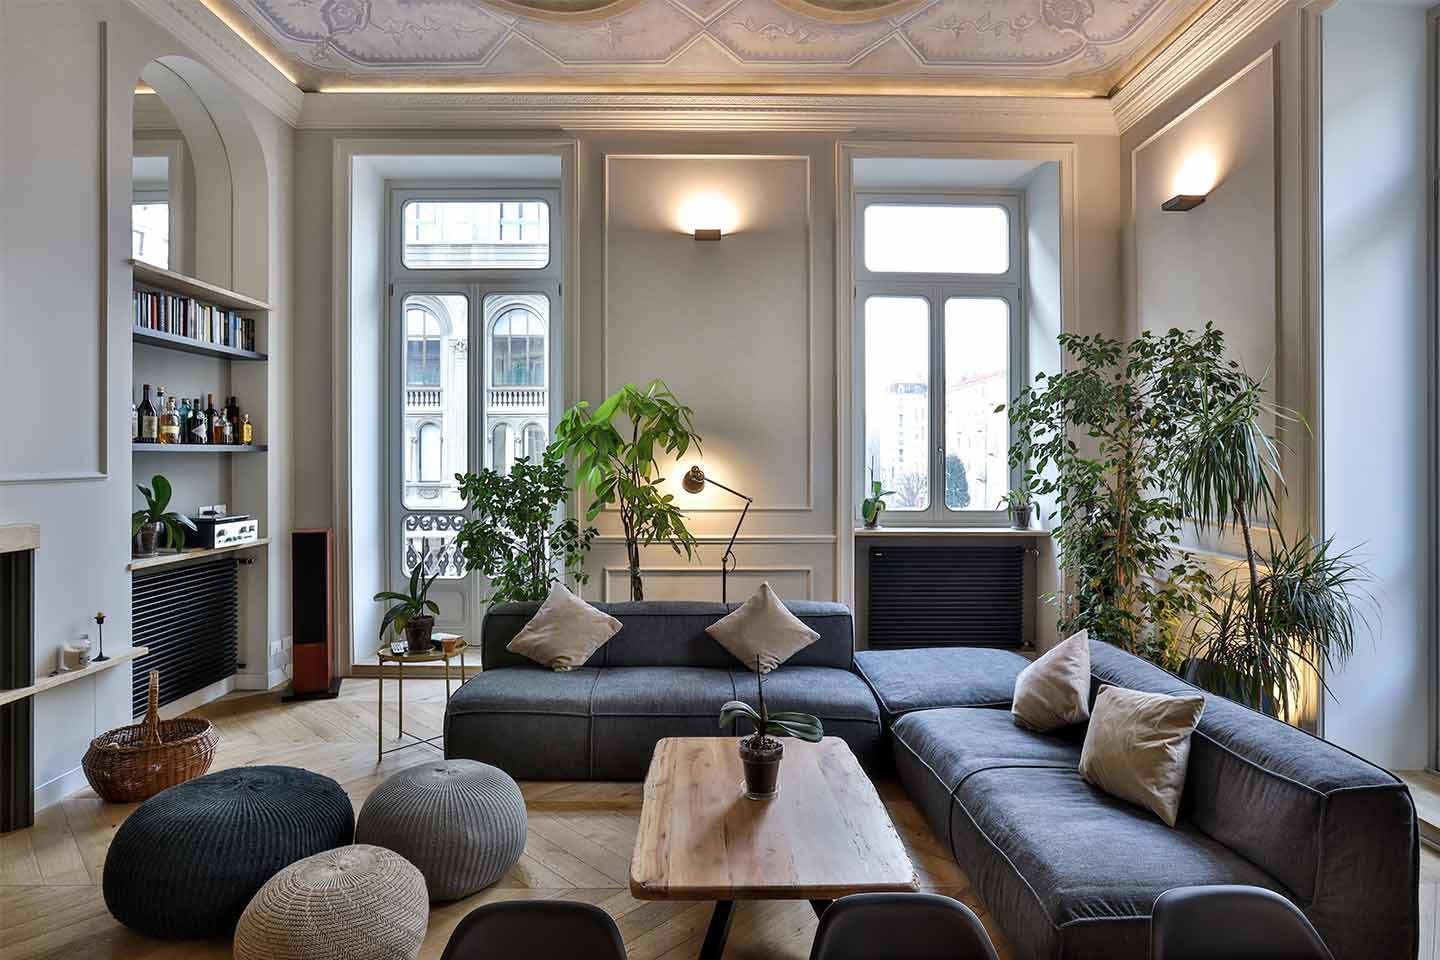 NOVOLI, FIRENZE, Apartment for sale of 55 Sq. mt., Restored, Heating Individual heating system, Energetic class: G, Epi: 175 kwh/m2 year, placed at 